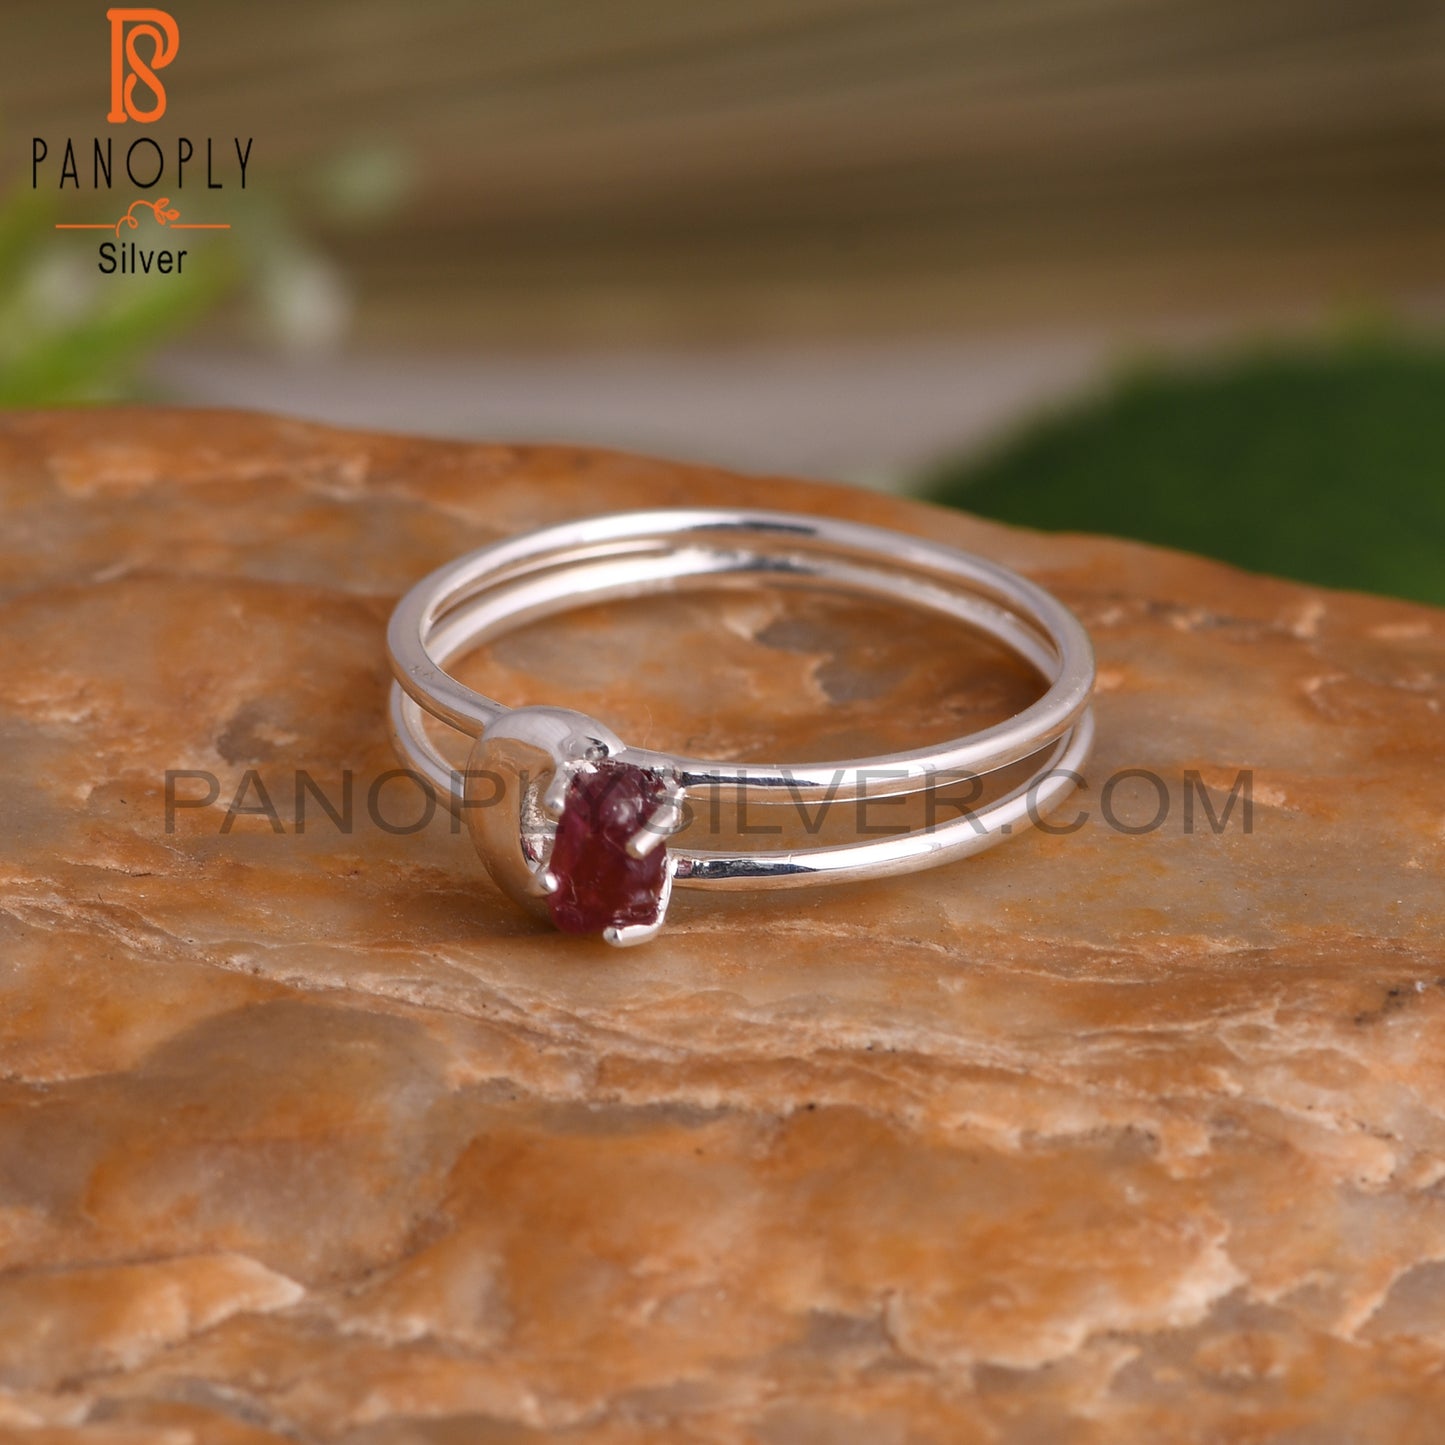 Spinel Ruby Rough Sterling Silver Ring